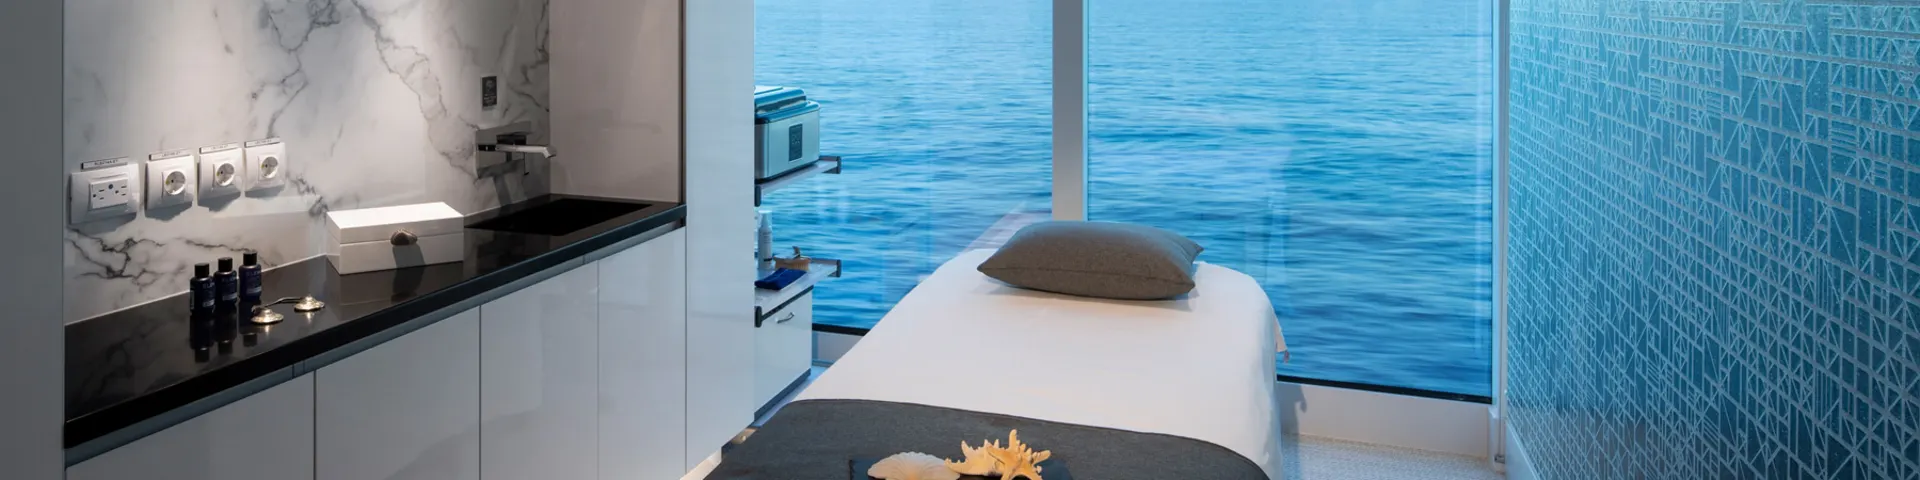 Celebrity Edge Treatment Room With View